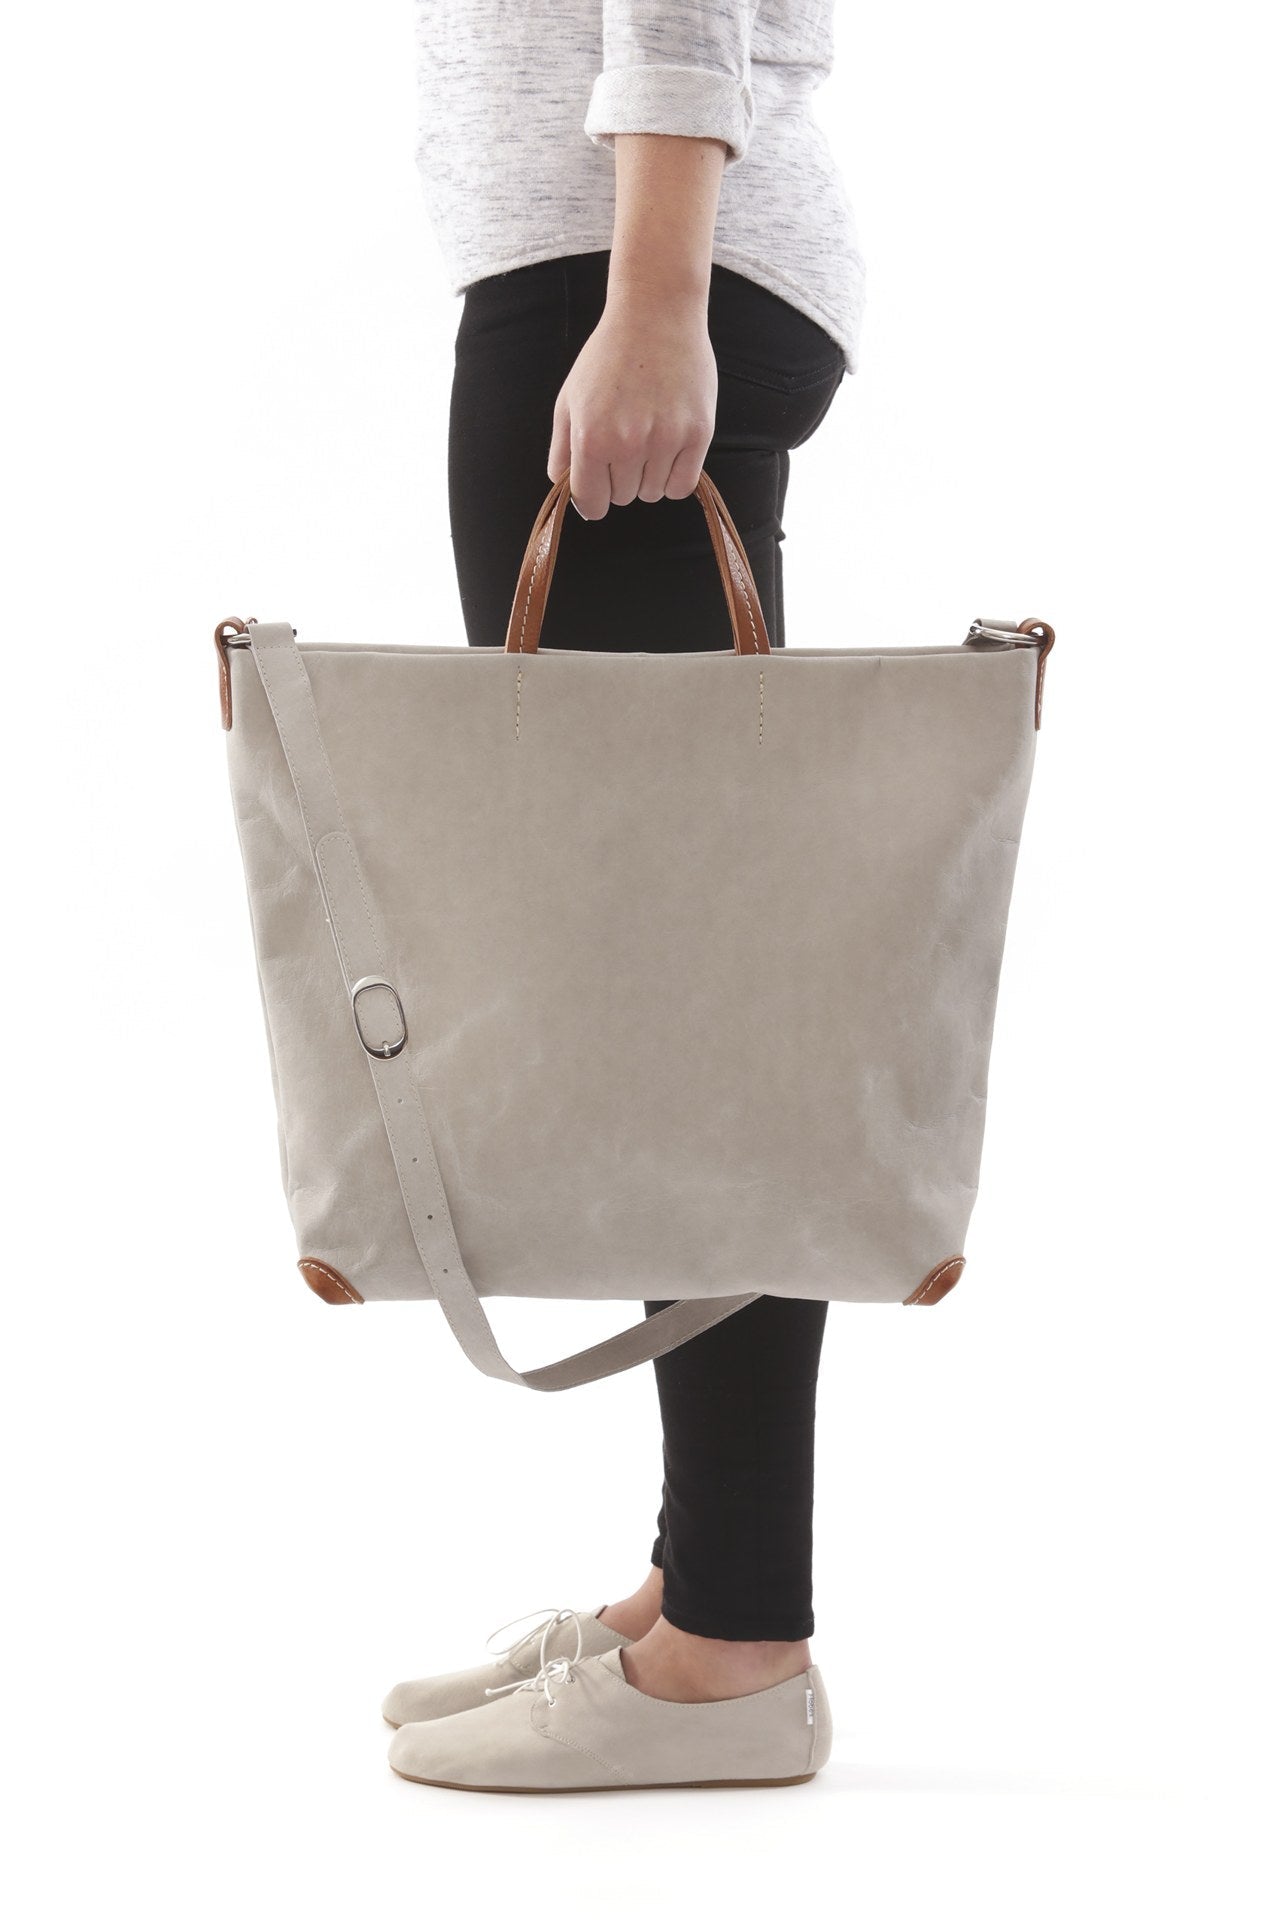 A woman is shown standing, and from a side view. She is carrying a grey washable paper tote bag by short leather handles. The bag's long strap is shown draped over the bag.